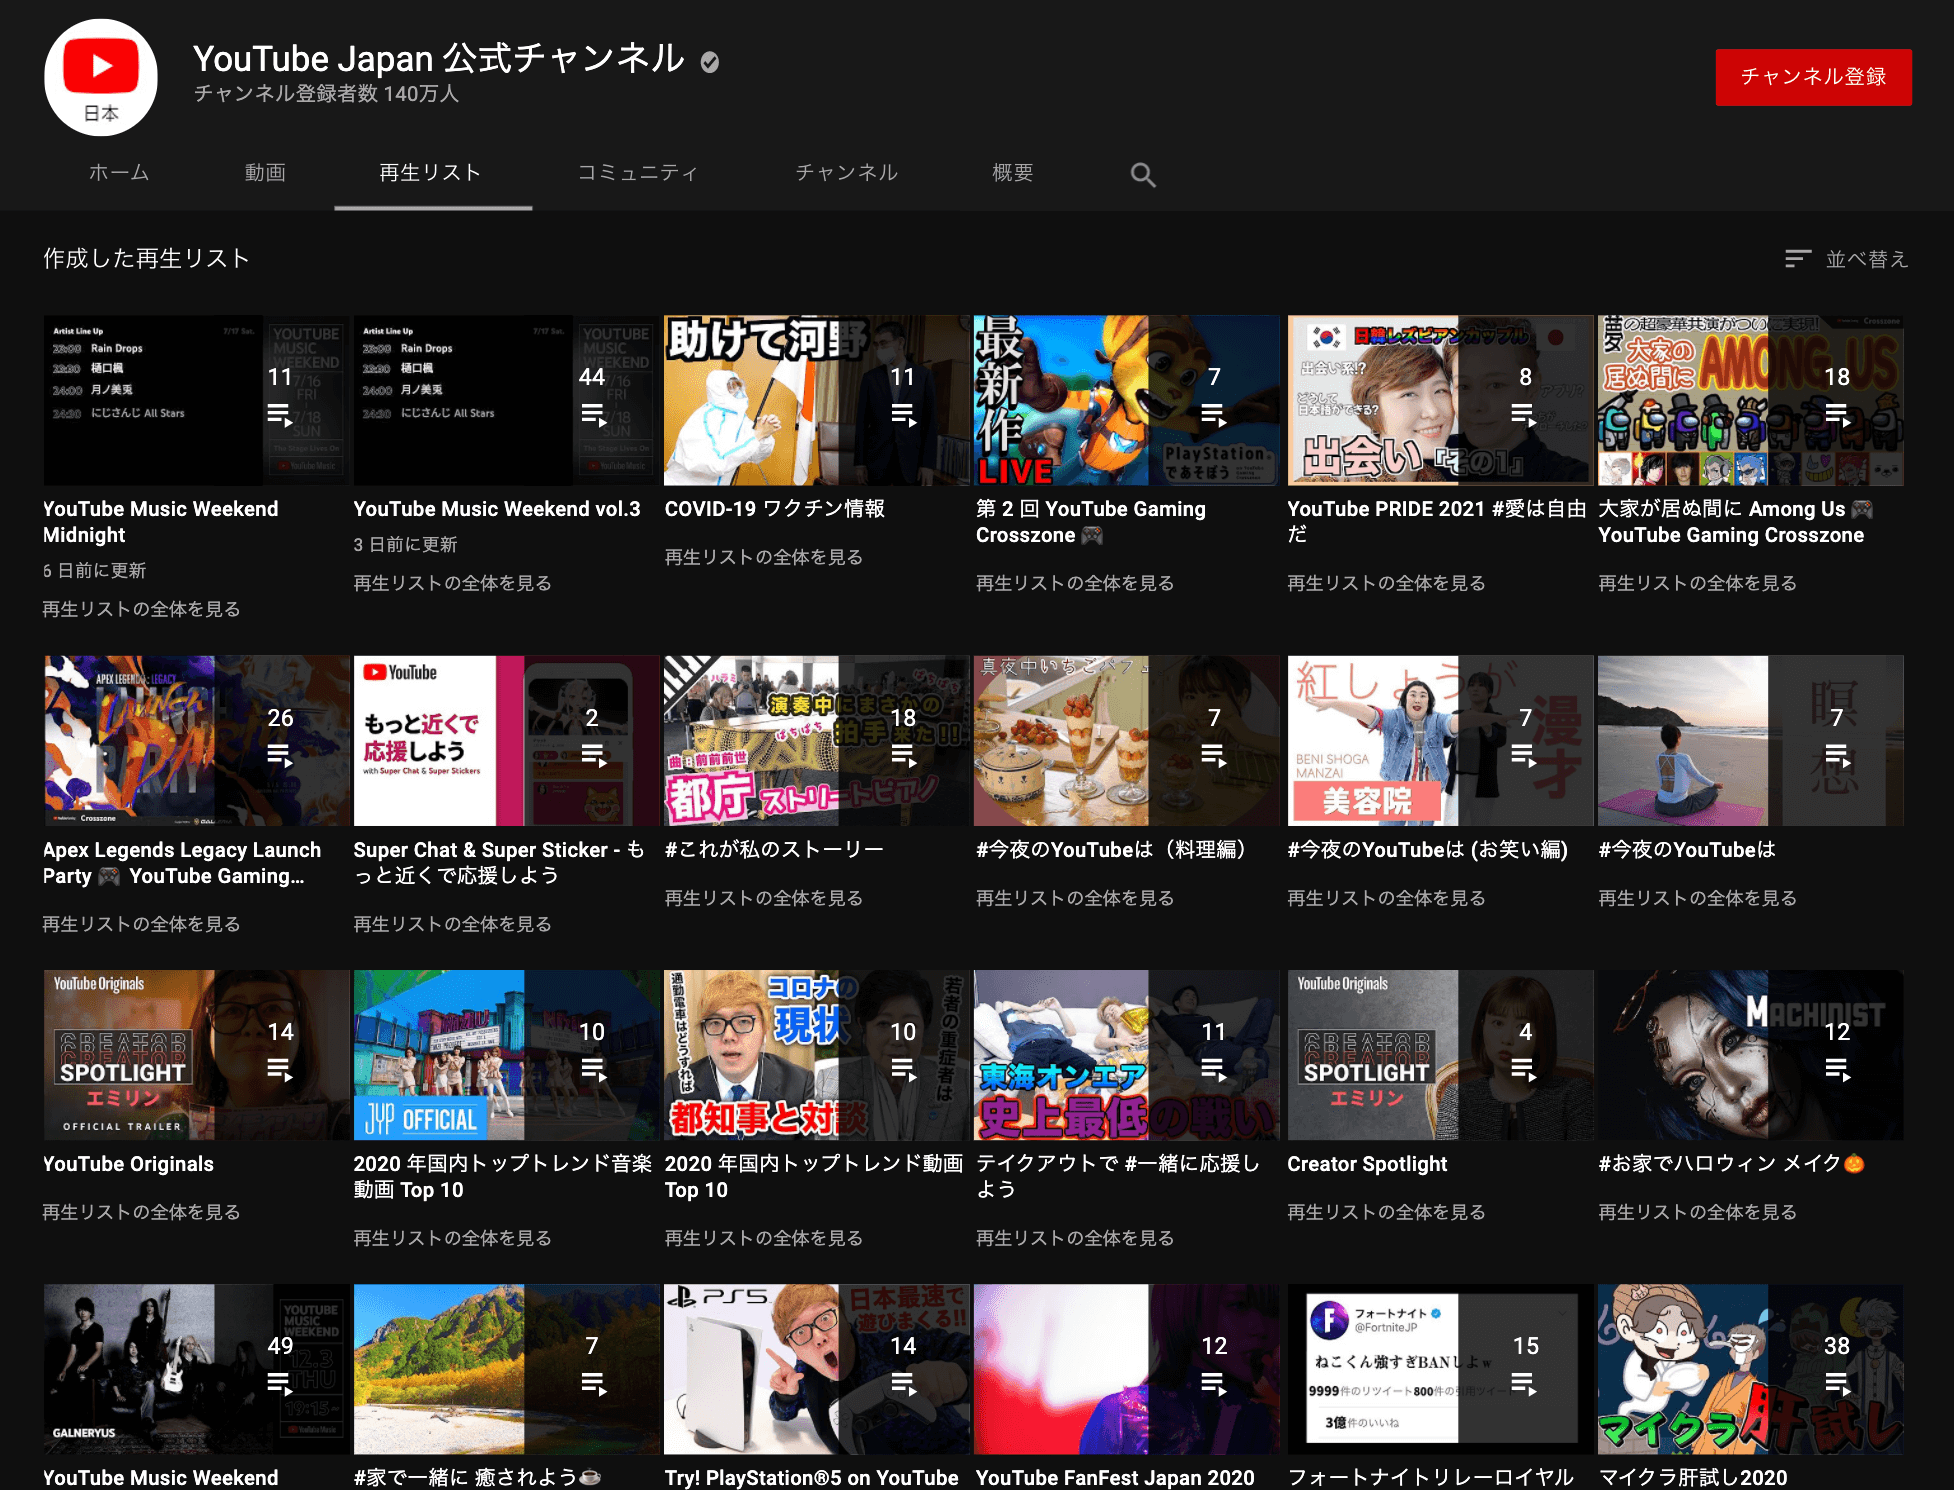 youtube japan official-view list